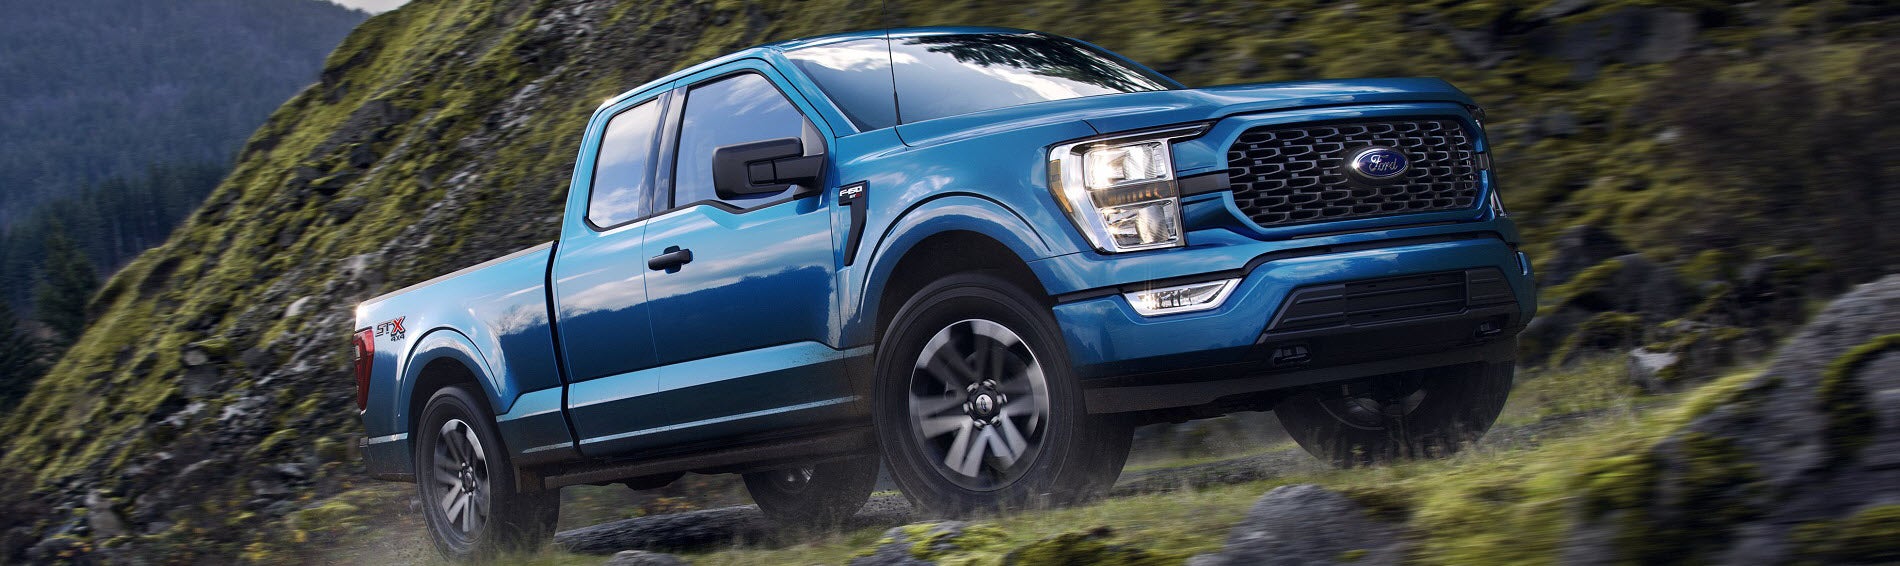 2021 Ford F-150 Review Nacogdoches TX | Tipton Ford